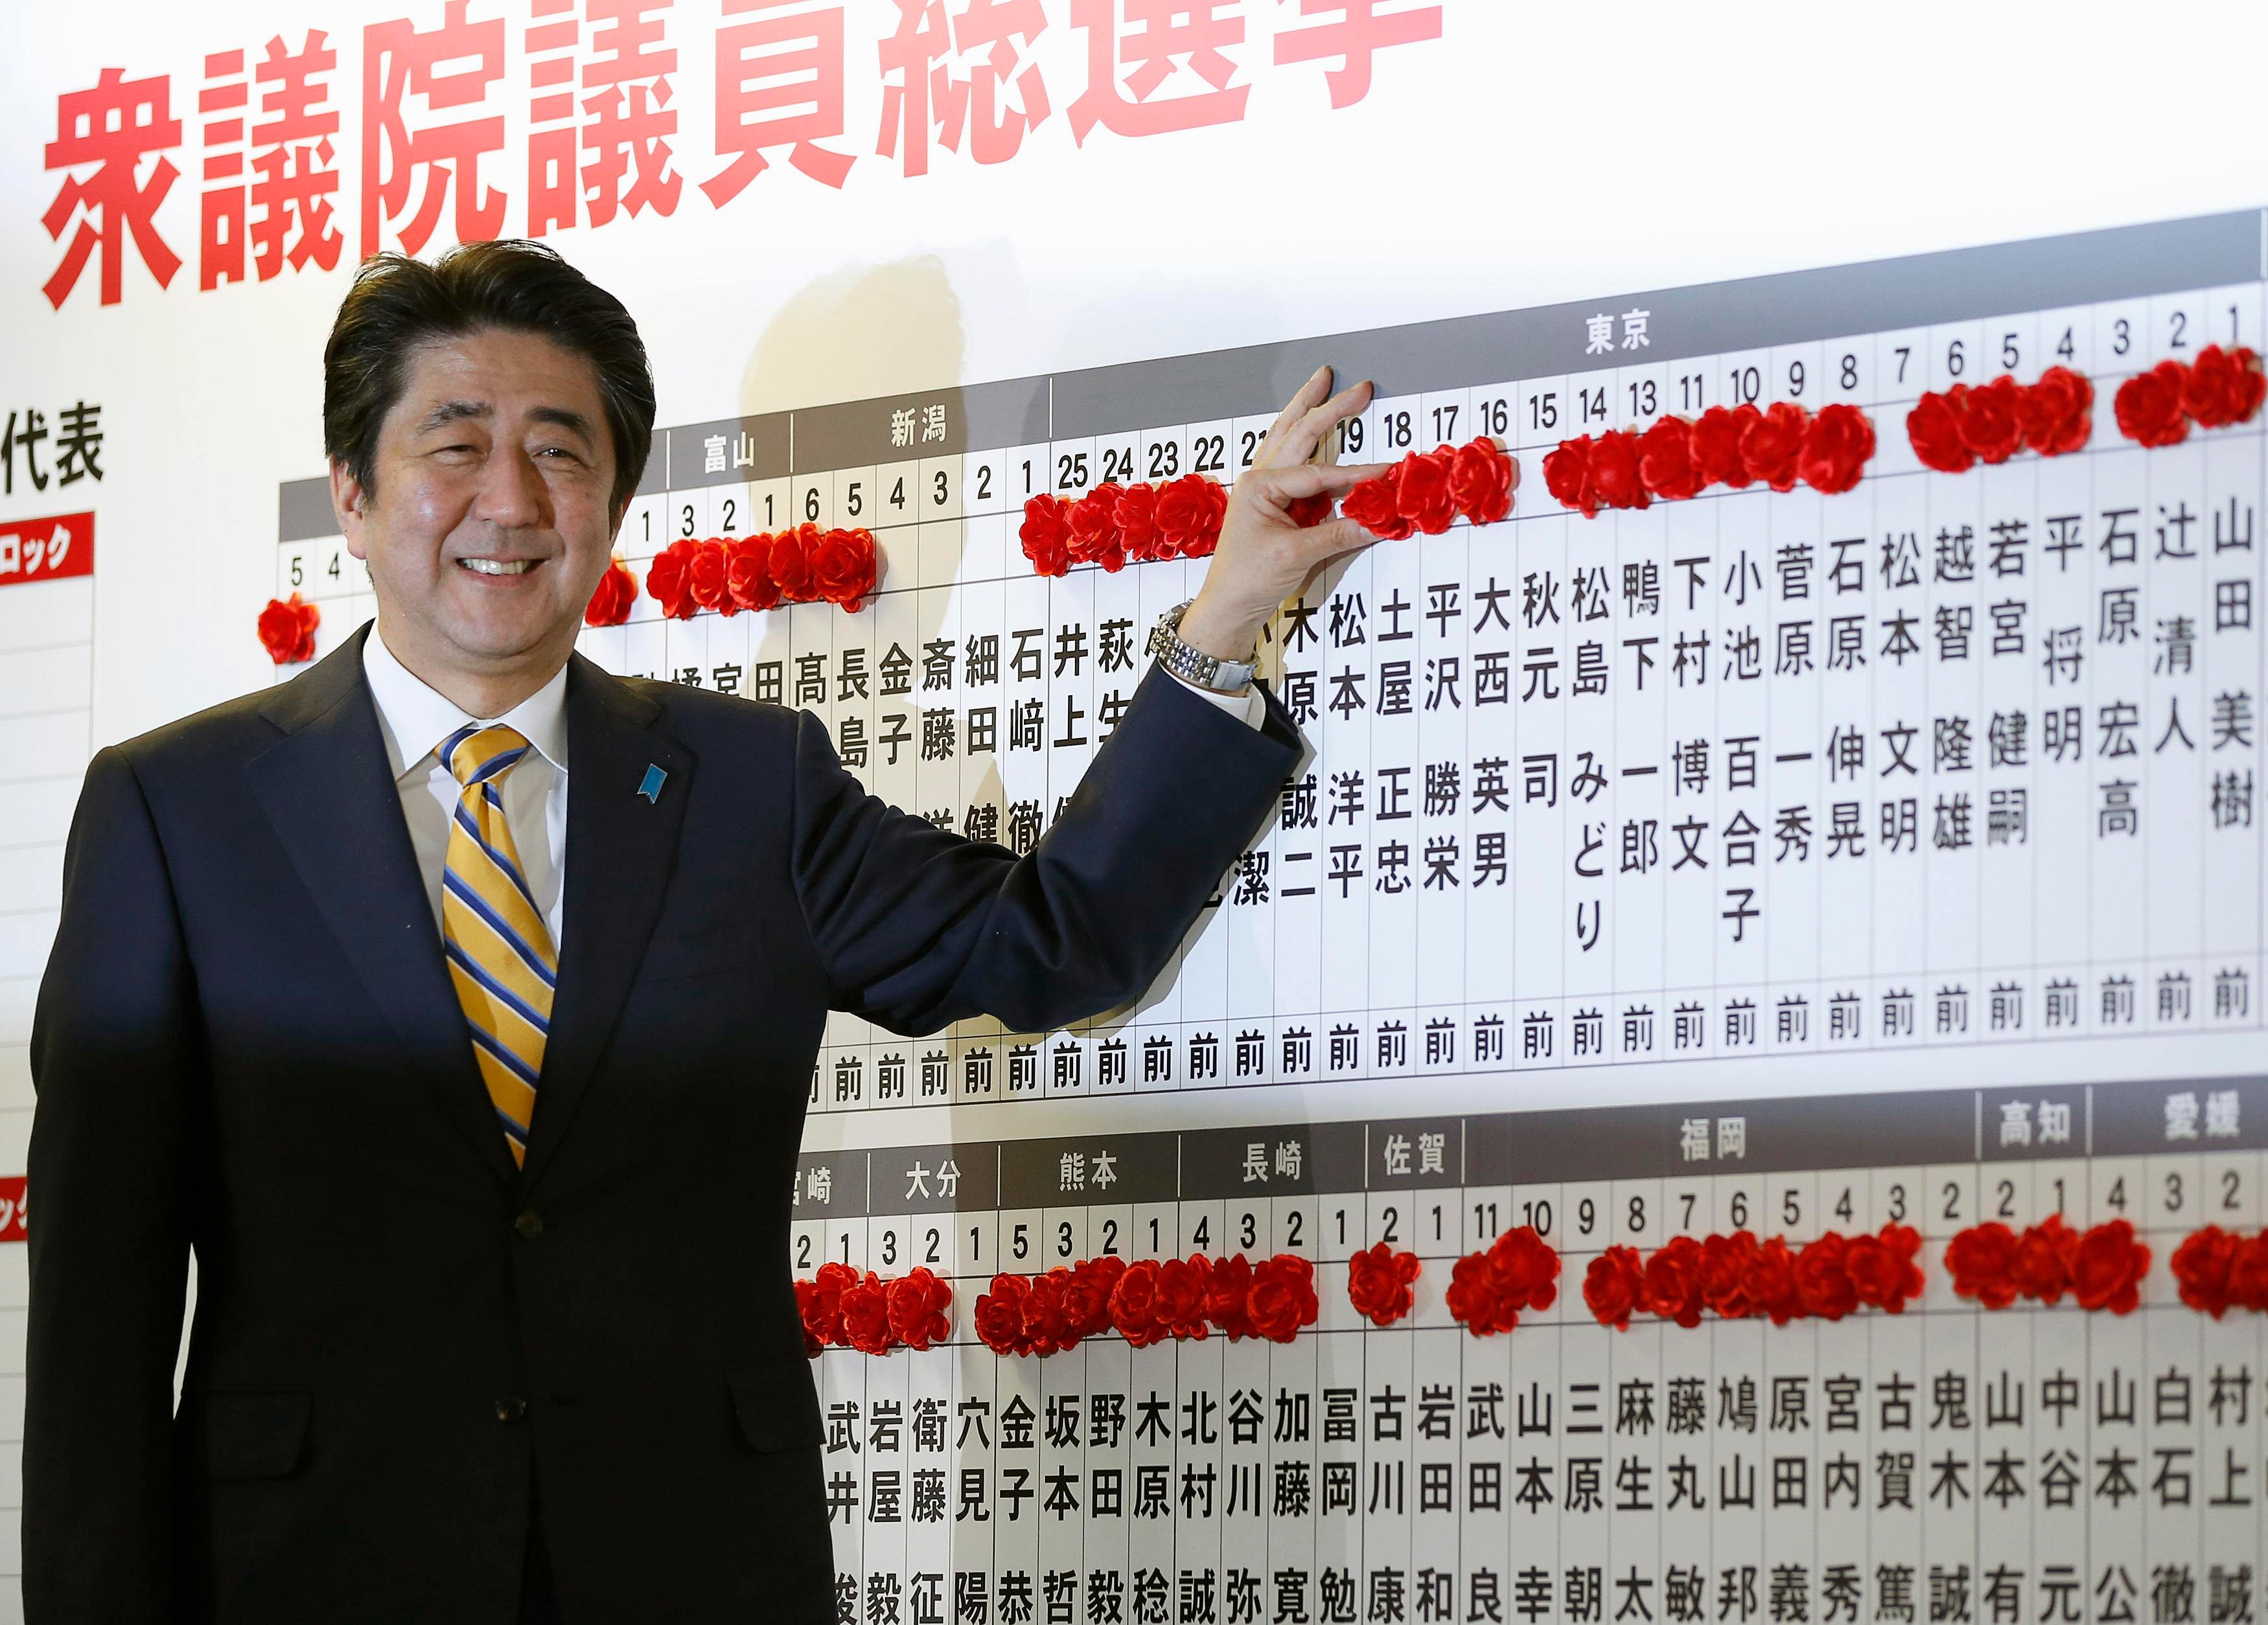 Japan's Prime Minister Shinzo Abe poses in front of a board showing Liberal Democratic Party (LDP) candidates' results during an election night event at the LDP headquarters in Tokyo December 14, 2014. Photo: Reuters